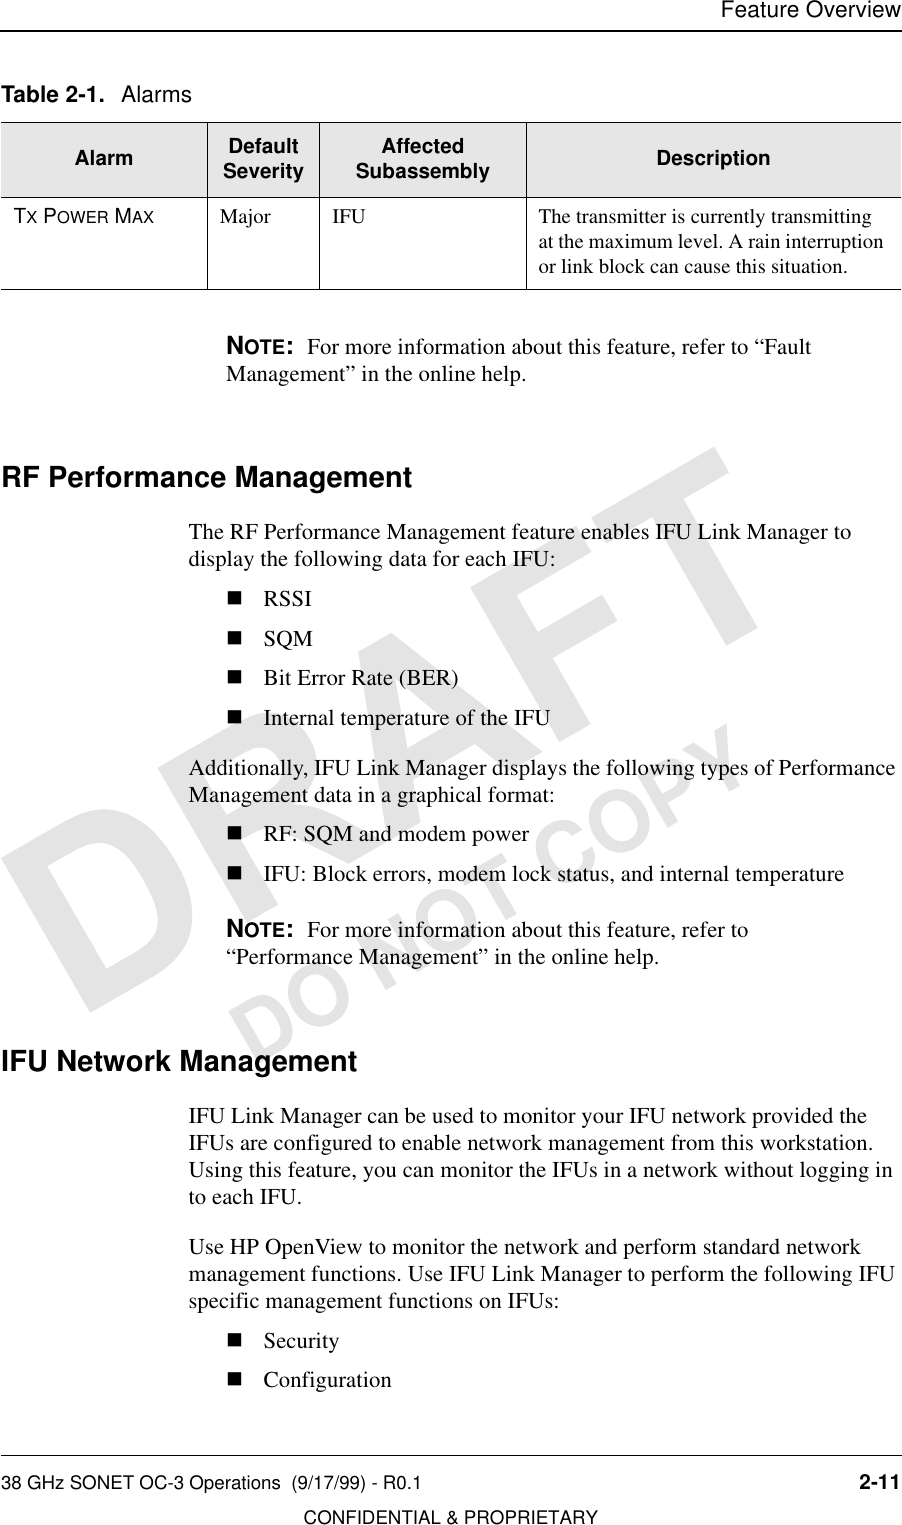 Feature Overview38 GHz SONET OC-3 Operations  (9/17/99) - R0.1 2-11CONFIDENTIAL &amp; PROPRIETARYDO NOT COPYNOTE:  For more information about this feature, refer to “Fault Management” in the online help.RF Performance ManagementThe RF Performance Management feature enables IFU Link Manager to display the following data for each IFU:nRSSInSQMnBit Error Rate (BER)nInternal temperature of the IFUAdditionally, IFU Link Manager displays the following types of Performance Management data in a graphical format:nRF: SQM and modem powernIFU: Block errors, modem lock status, and internal temperatureNOTE:  For more information about this feature, refer to “Performance Management” in the online help.IFU Network ManagementIFU Link Manager can be used to monitor your IFU network provided the IFUs are configured to enable network management from this workstation. Using this feature, you can monitor the IFUs in a network without logging in to each IFU.Use HP OpenView to monitor the network and perform standard network management functions. Use IFU Link Manager to perform the following IFU specific management functions on IFUs:nSecuritynConfigurationTX POWER MAX Major IFU The transmitter is currently transmitting at the maximum level. A rain interruption or link block can cause this situation.Table 2-1. AlarmsAlarm Default Severity Affected Subassembly Description